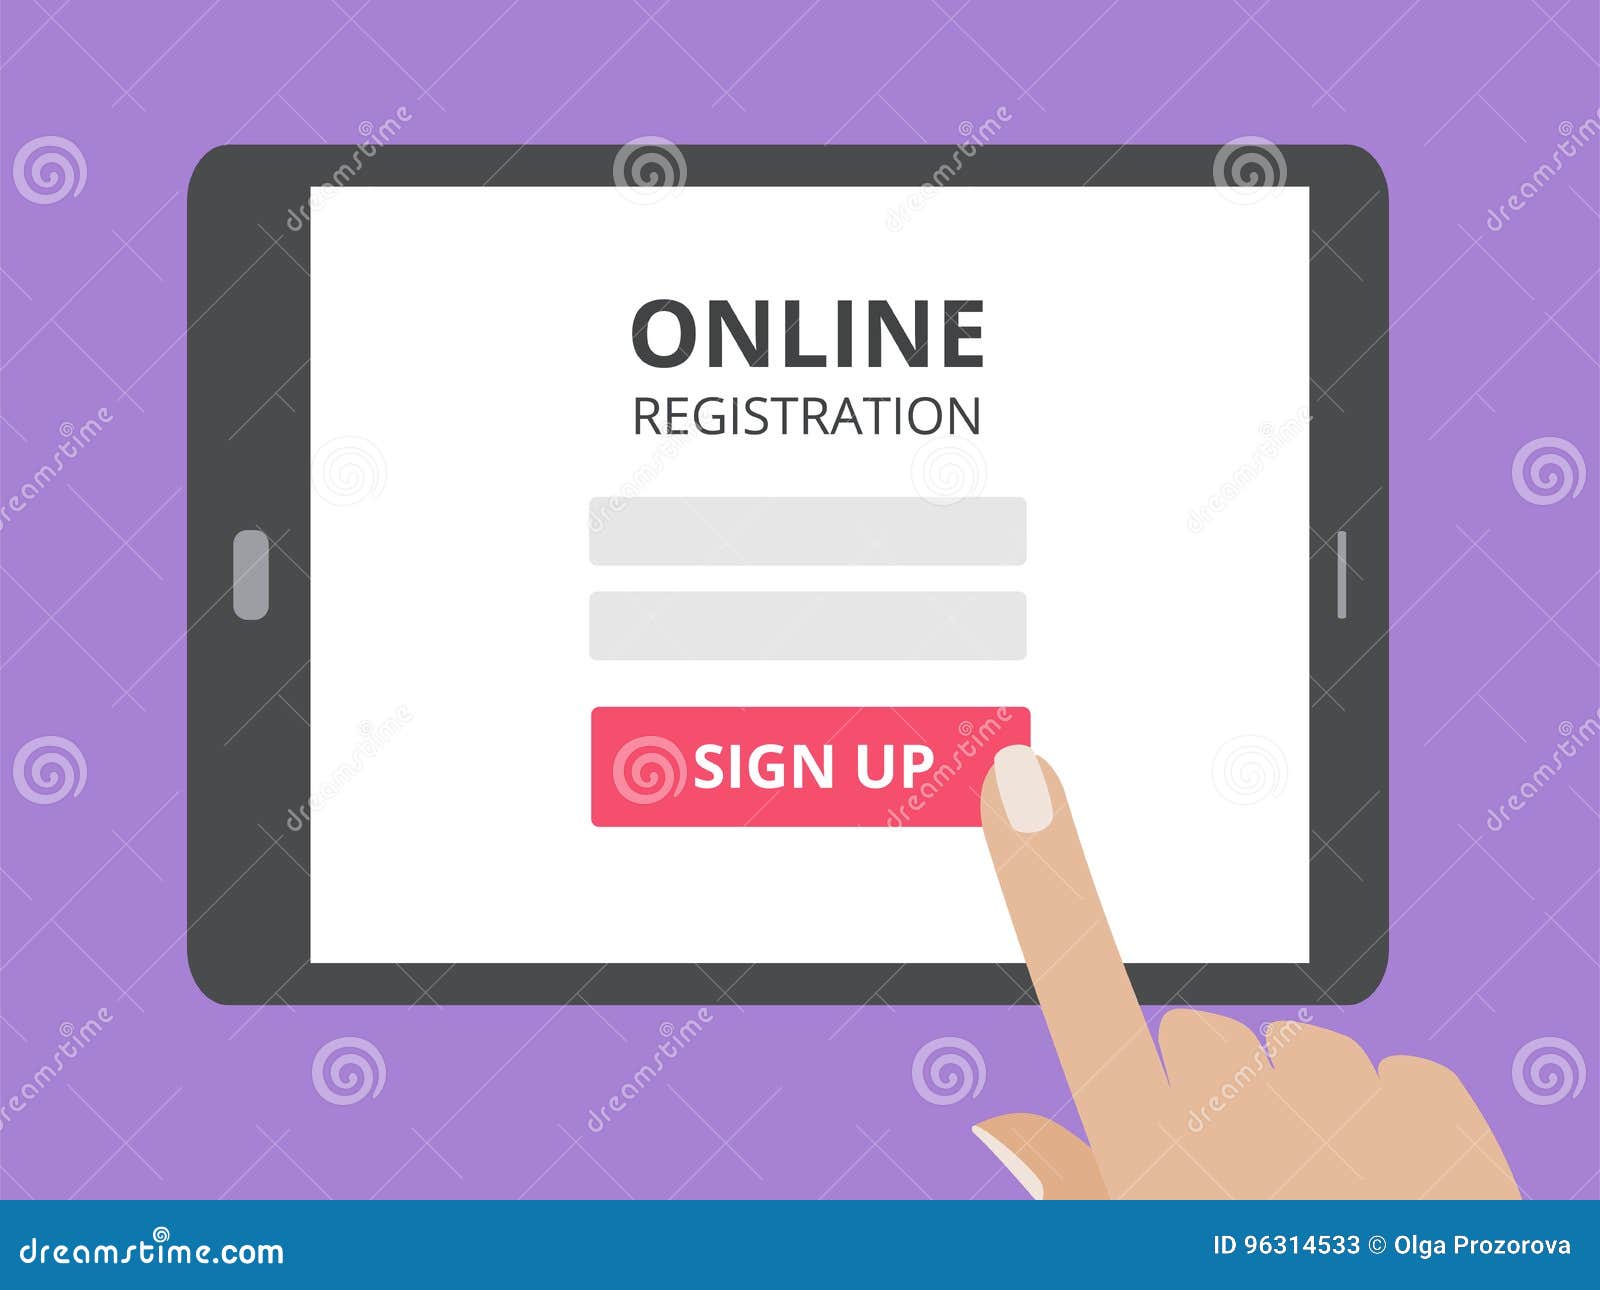 hand touching screen of tablet computer with online registration form and sign up button.